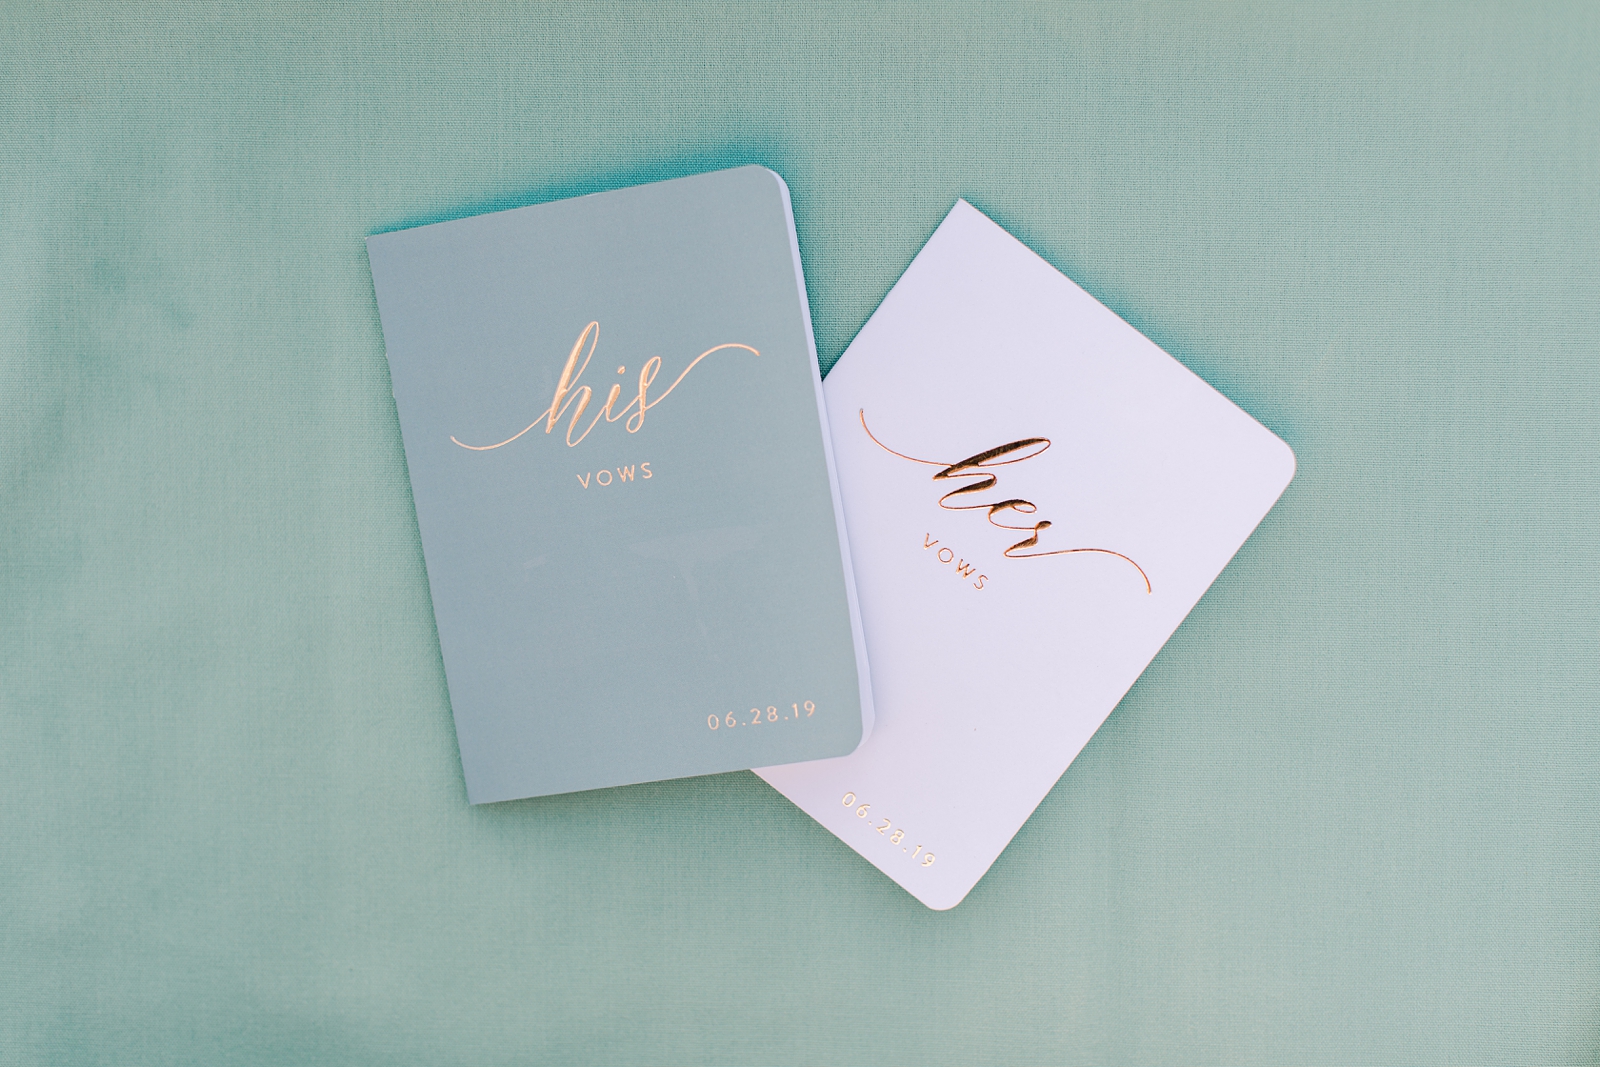 personalized his and hers vow books for wedding